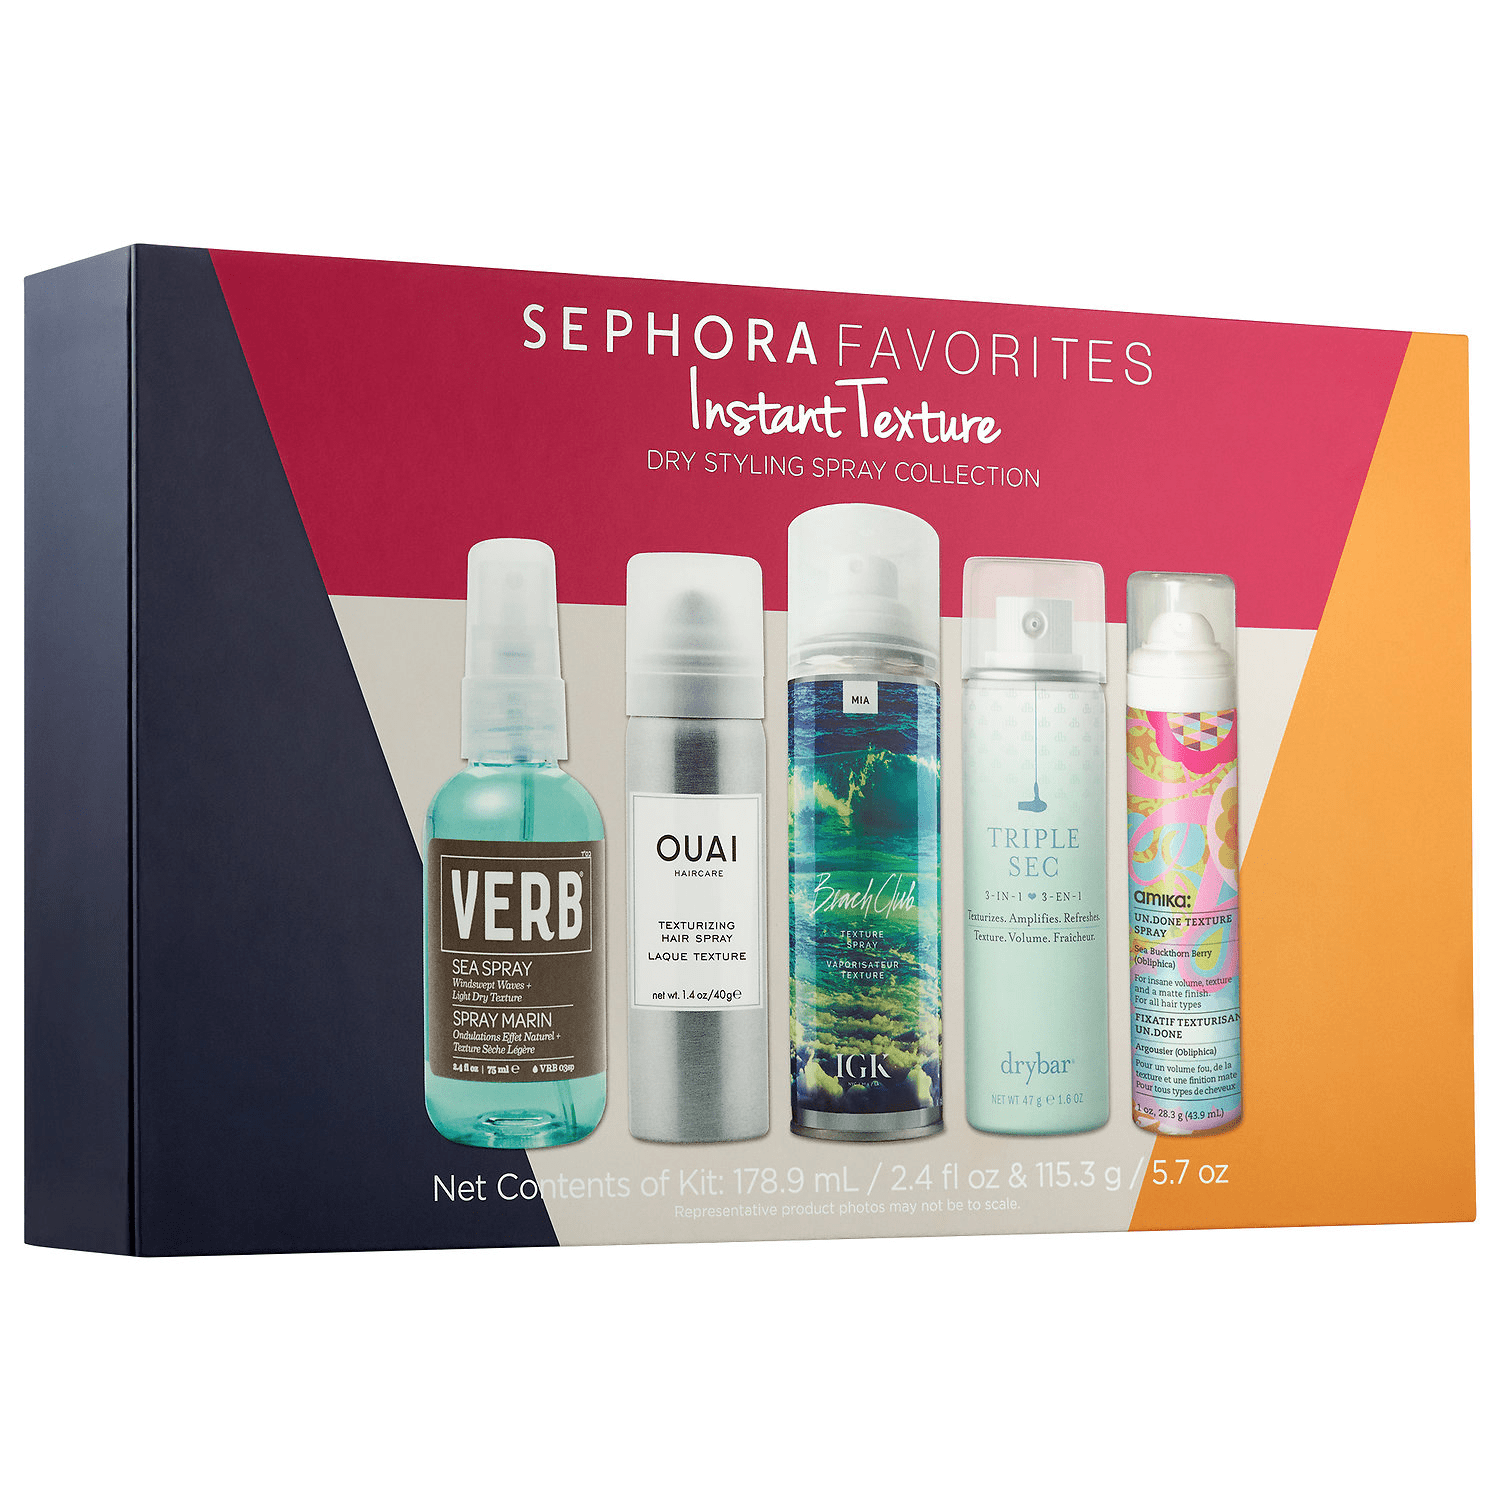 5 More Sephora Favorites Kits for Summer Hair Available Now + Coupons -  Hello Subscription